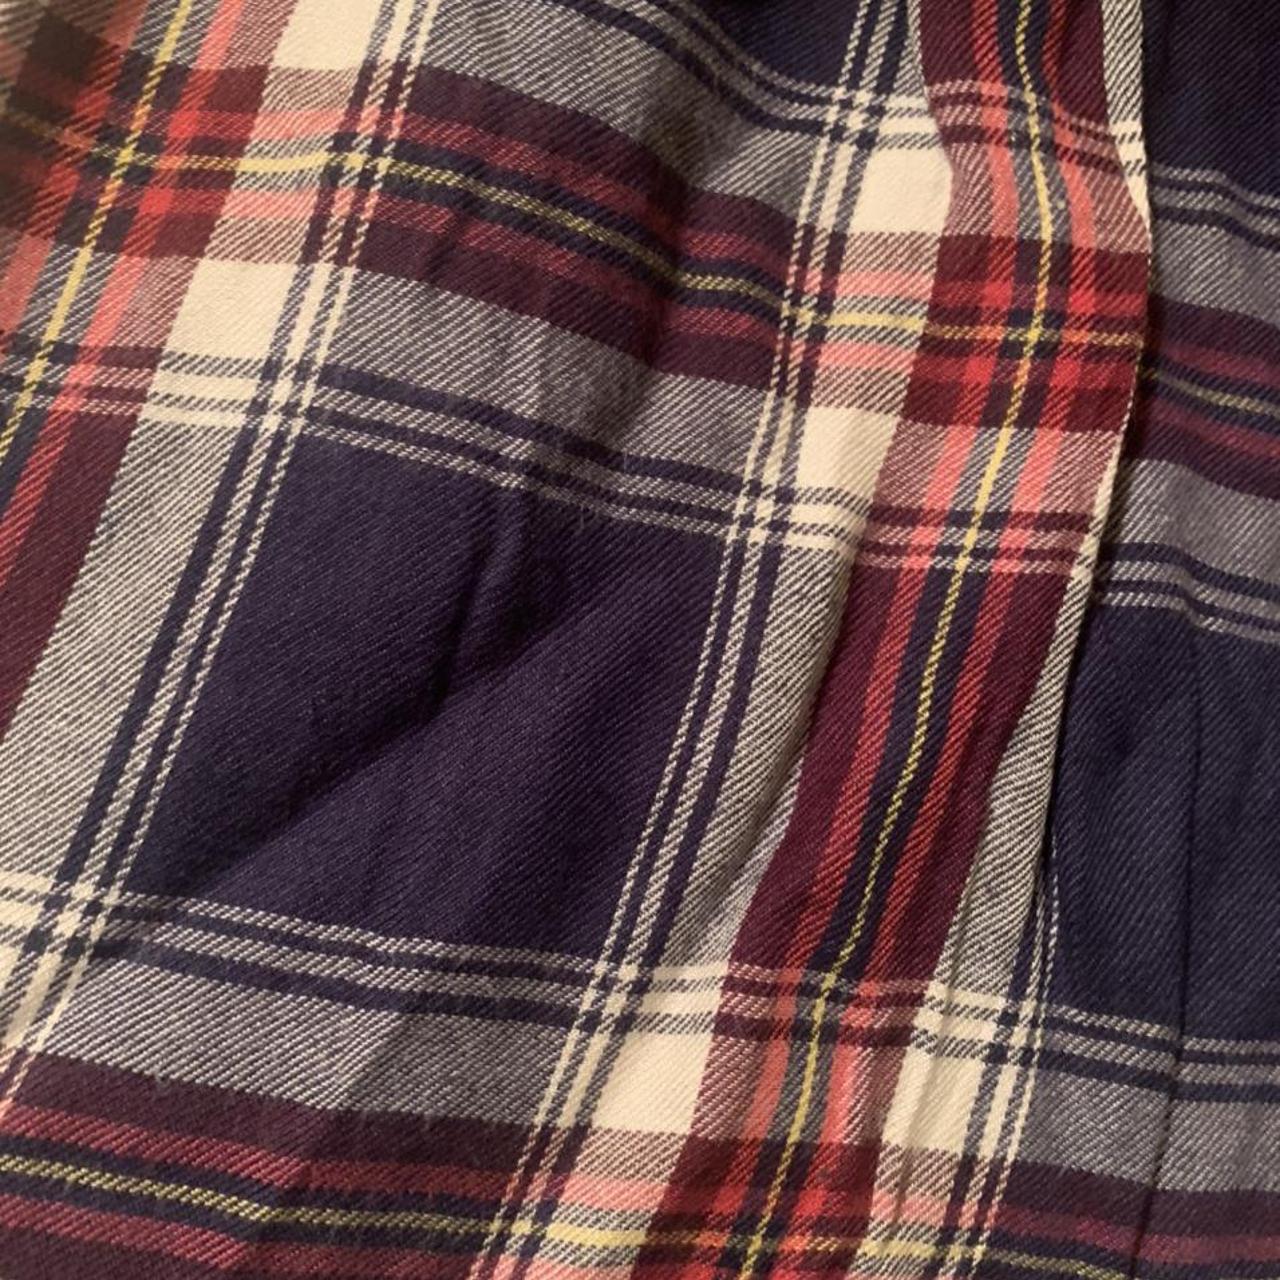 Abercrombie & Fitch tartan plaid navy and red mini... - Depop